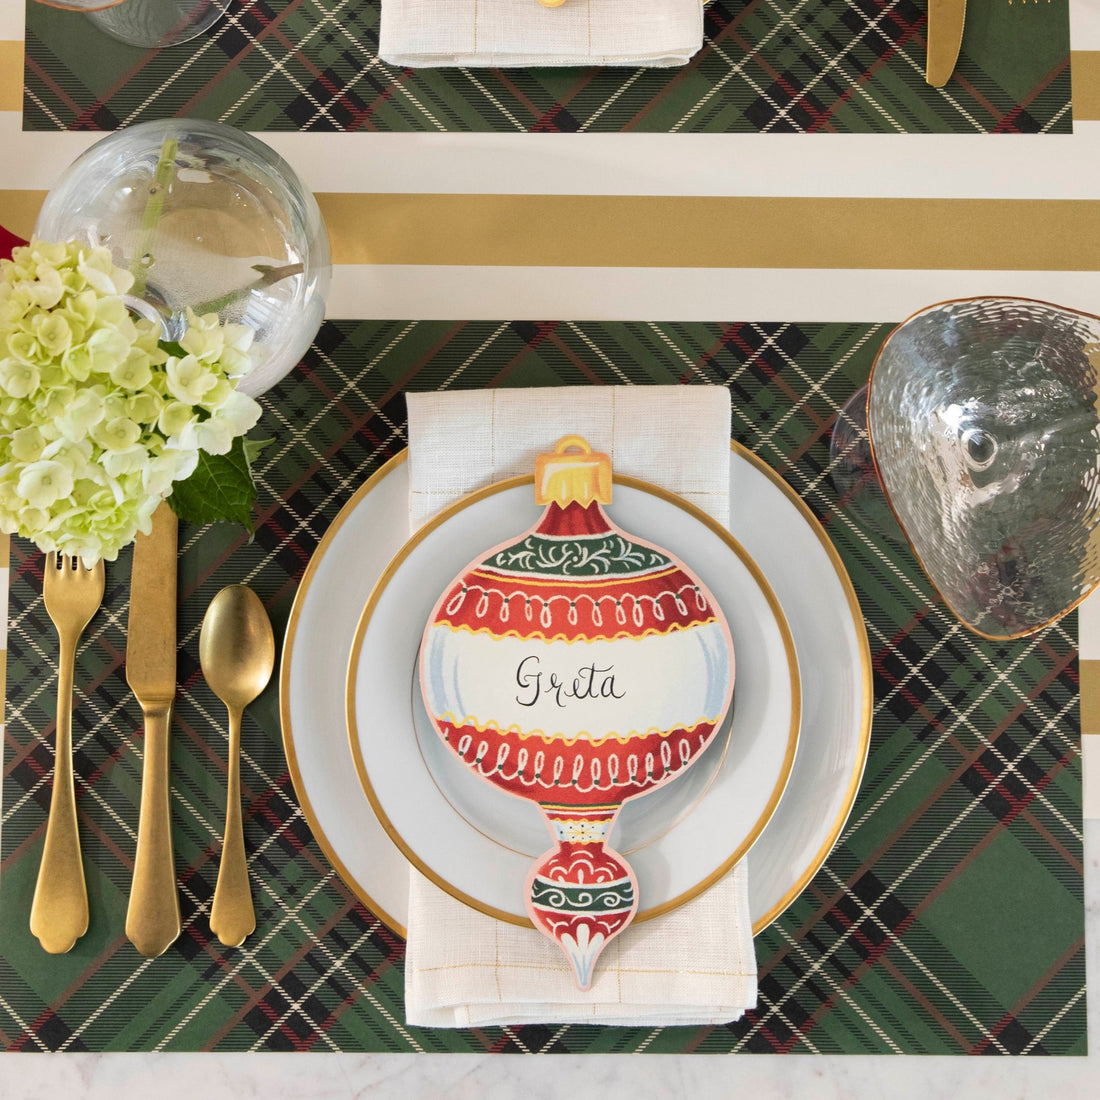 The Green Plaid Placemat under a festive holiday-themed place setting, from above.